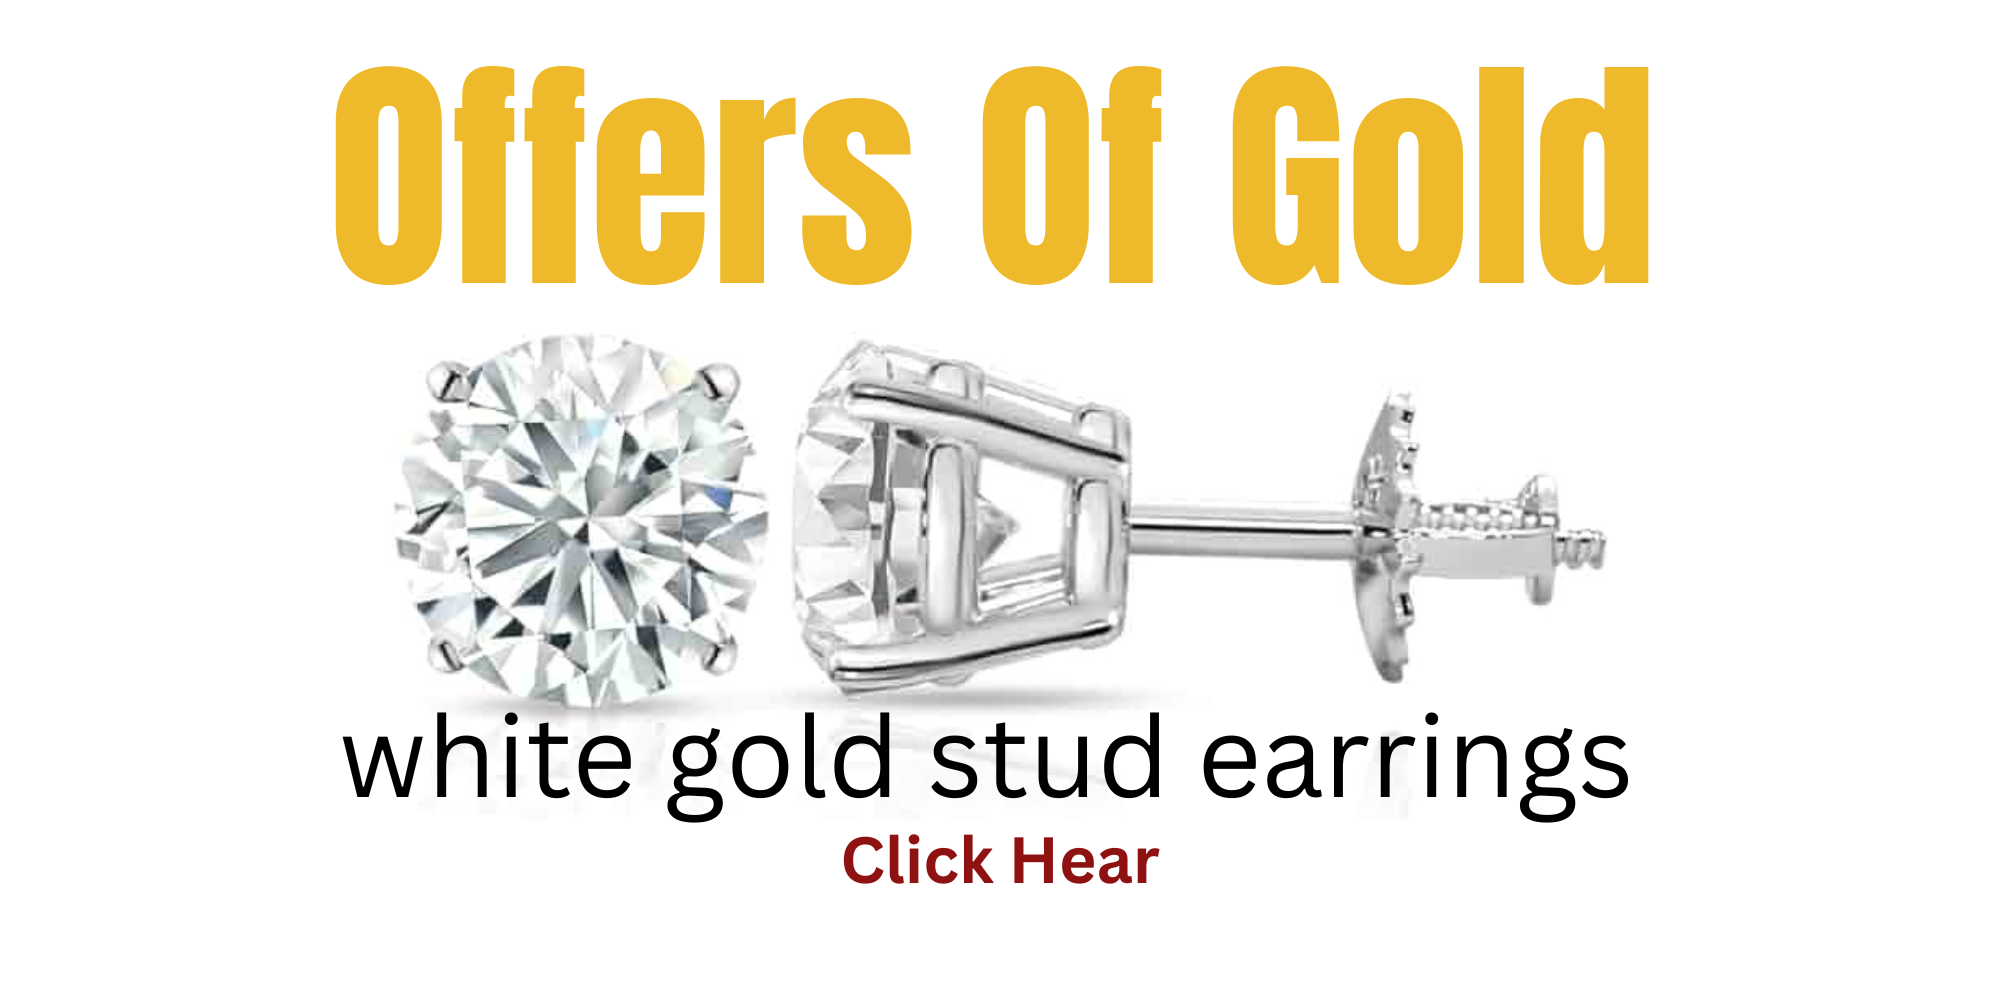 “White Gold Round Stud Earrings”: For a classic and timeless pair of earrings.